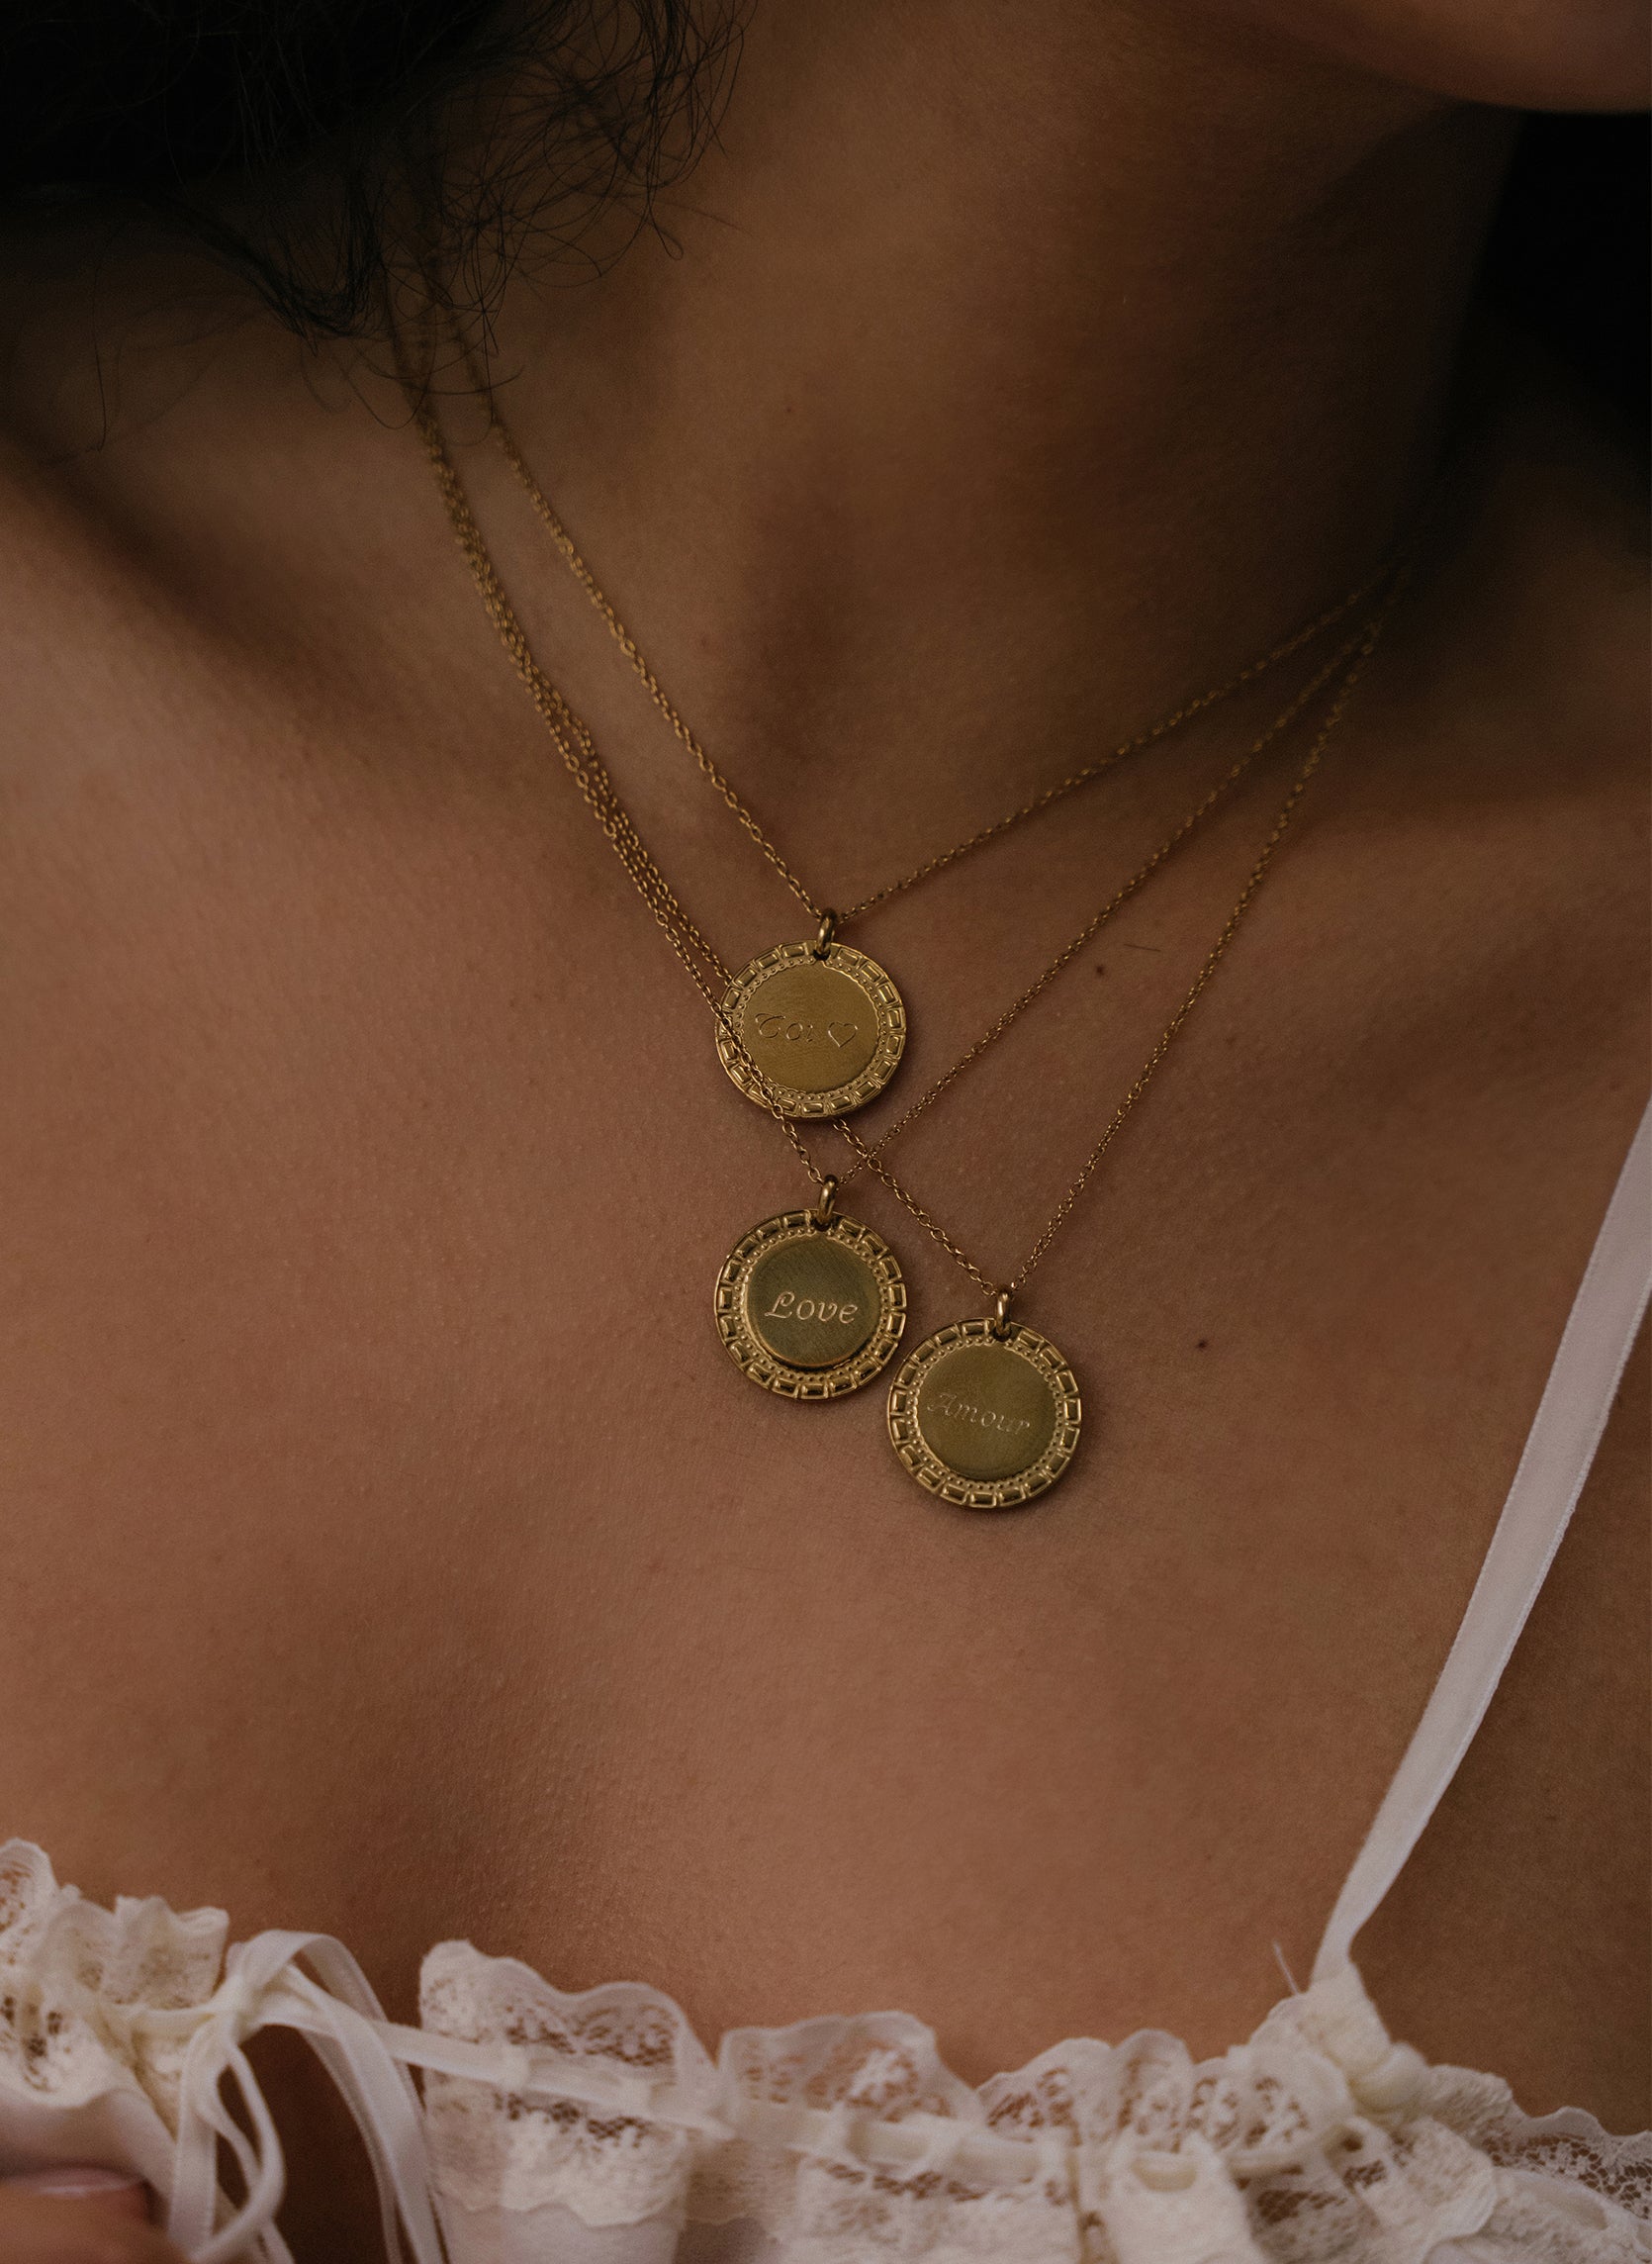 Medal necklace Amour